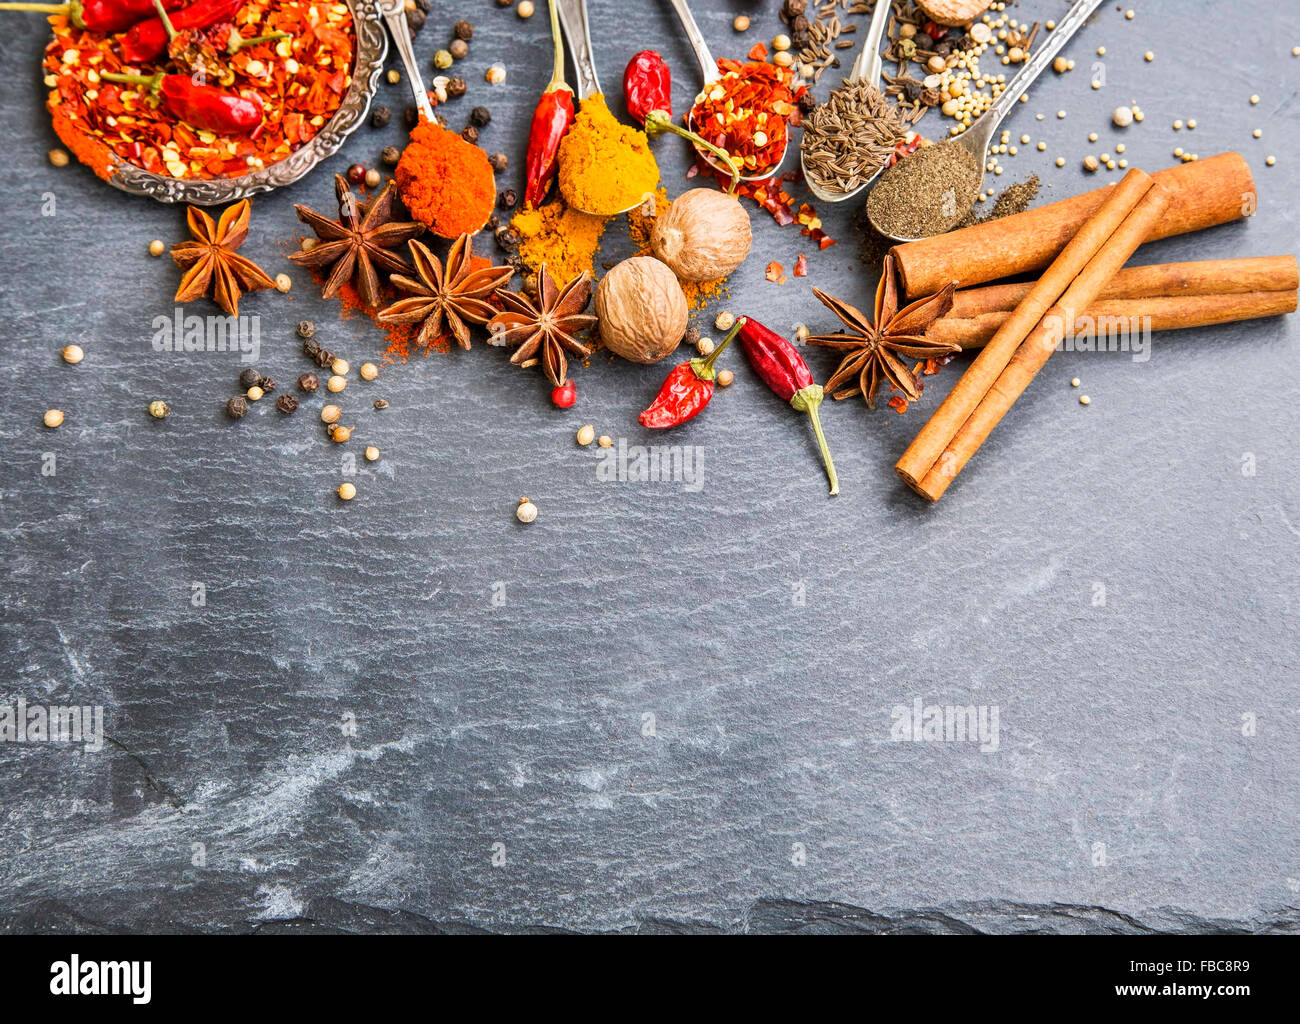 Aromatic spices with pepper and turmeric powders,cumin and coriander seeds, chili flakes , anise, nutmeg and cinnamon Stock Photo